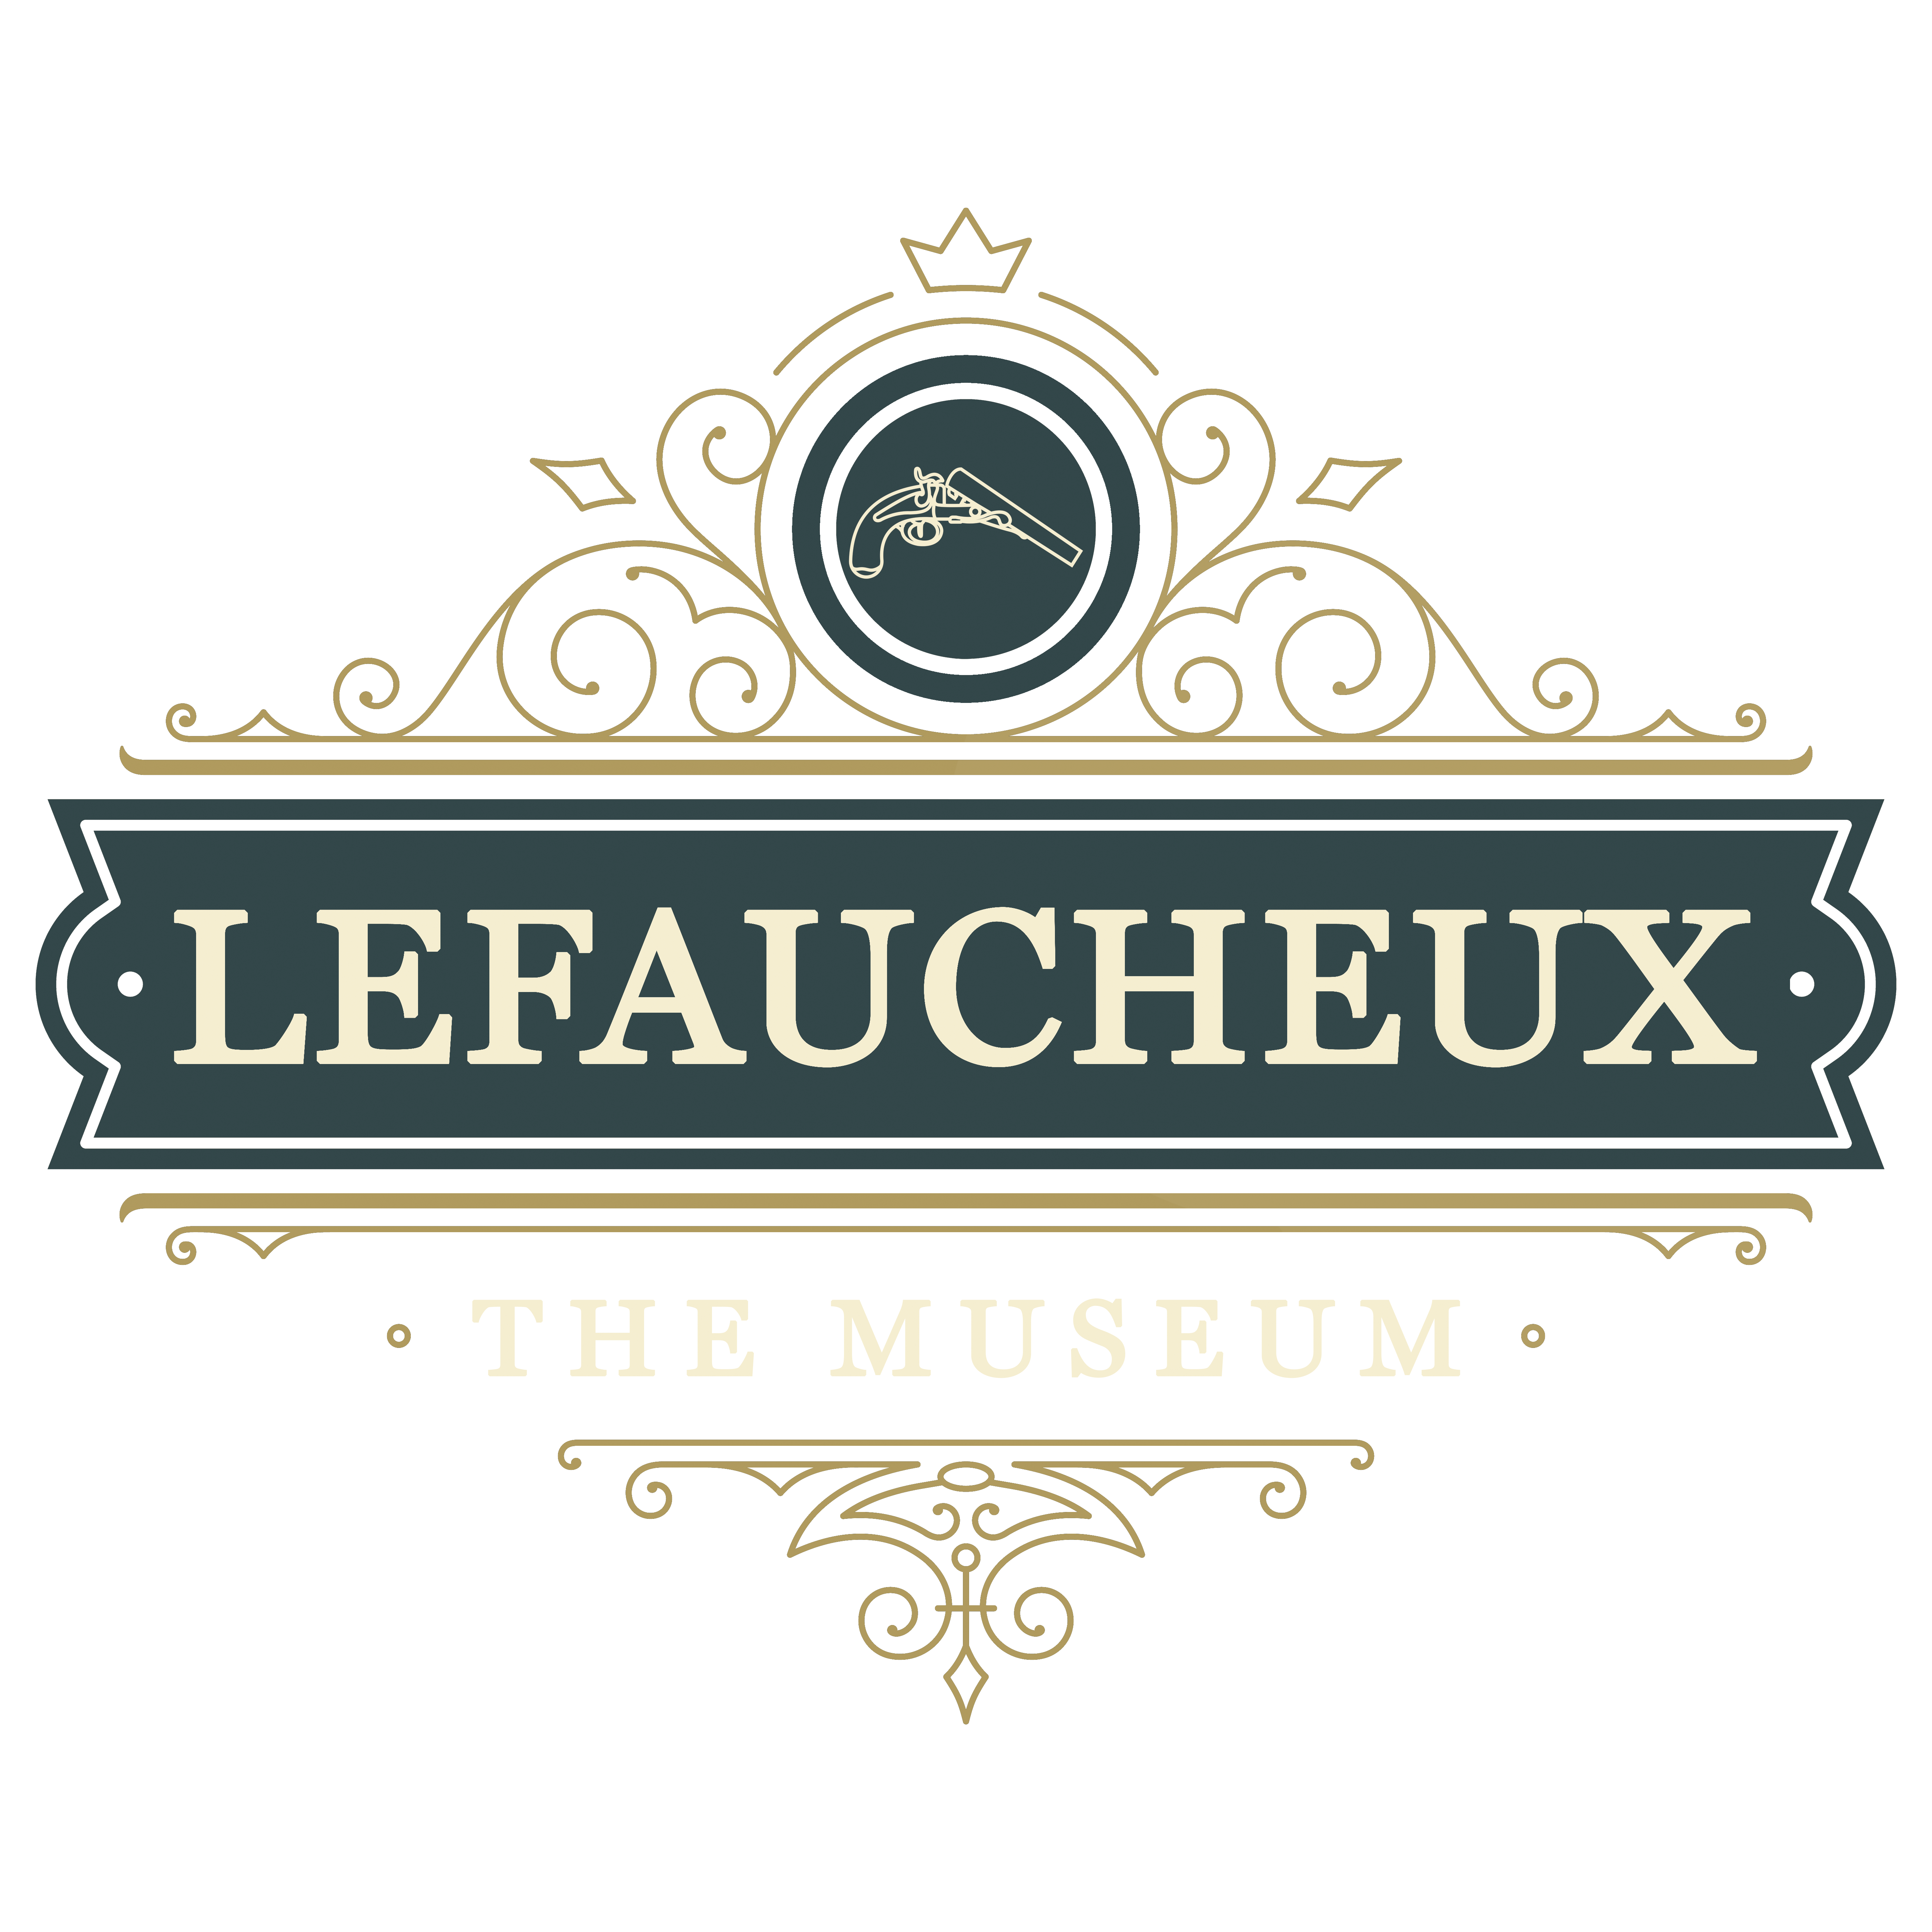 The Lefaucheux Museum is coming soon